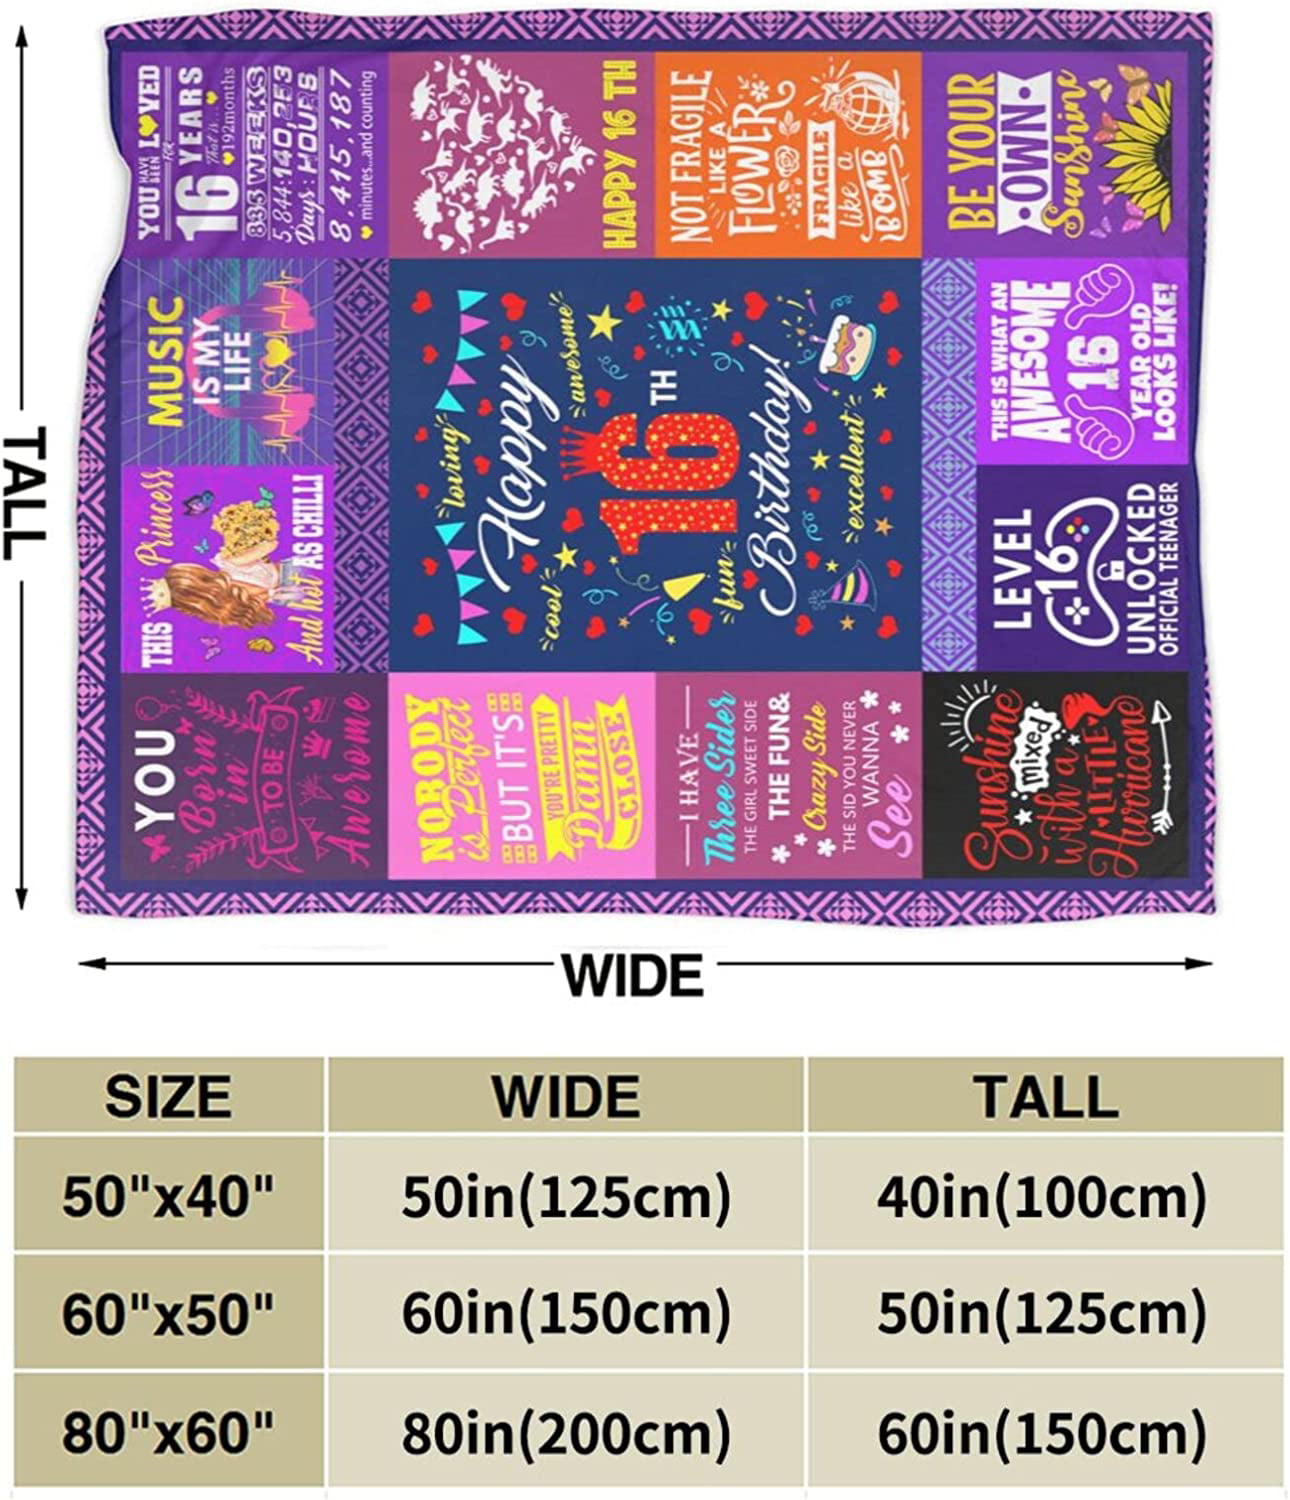 Basiole 13 Year Old Girl Gift Ideas Blanket, Gifts for 13 Year Old